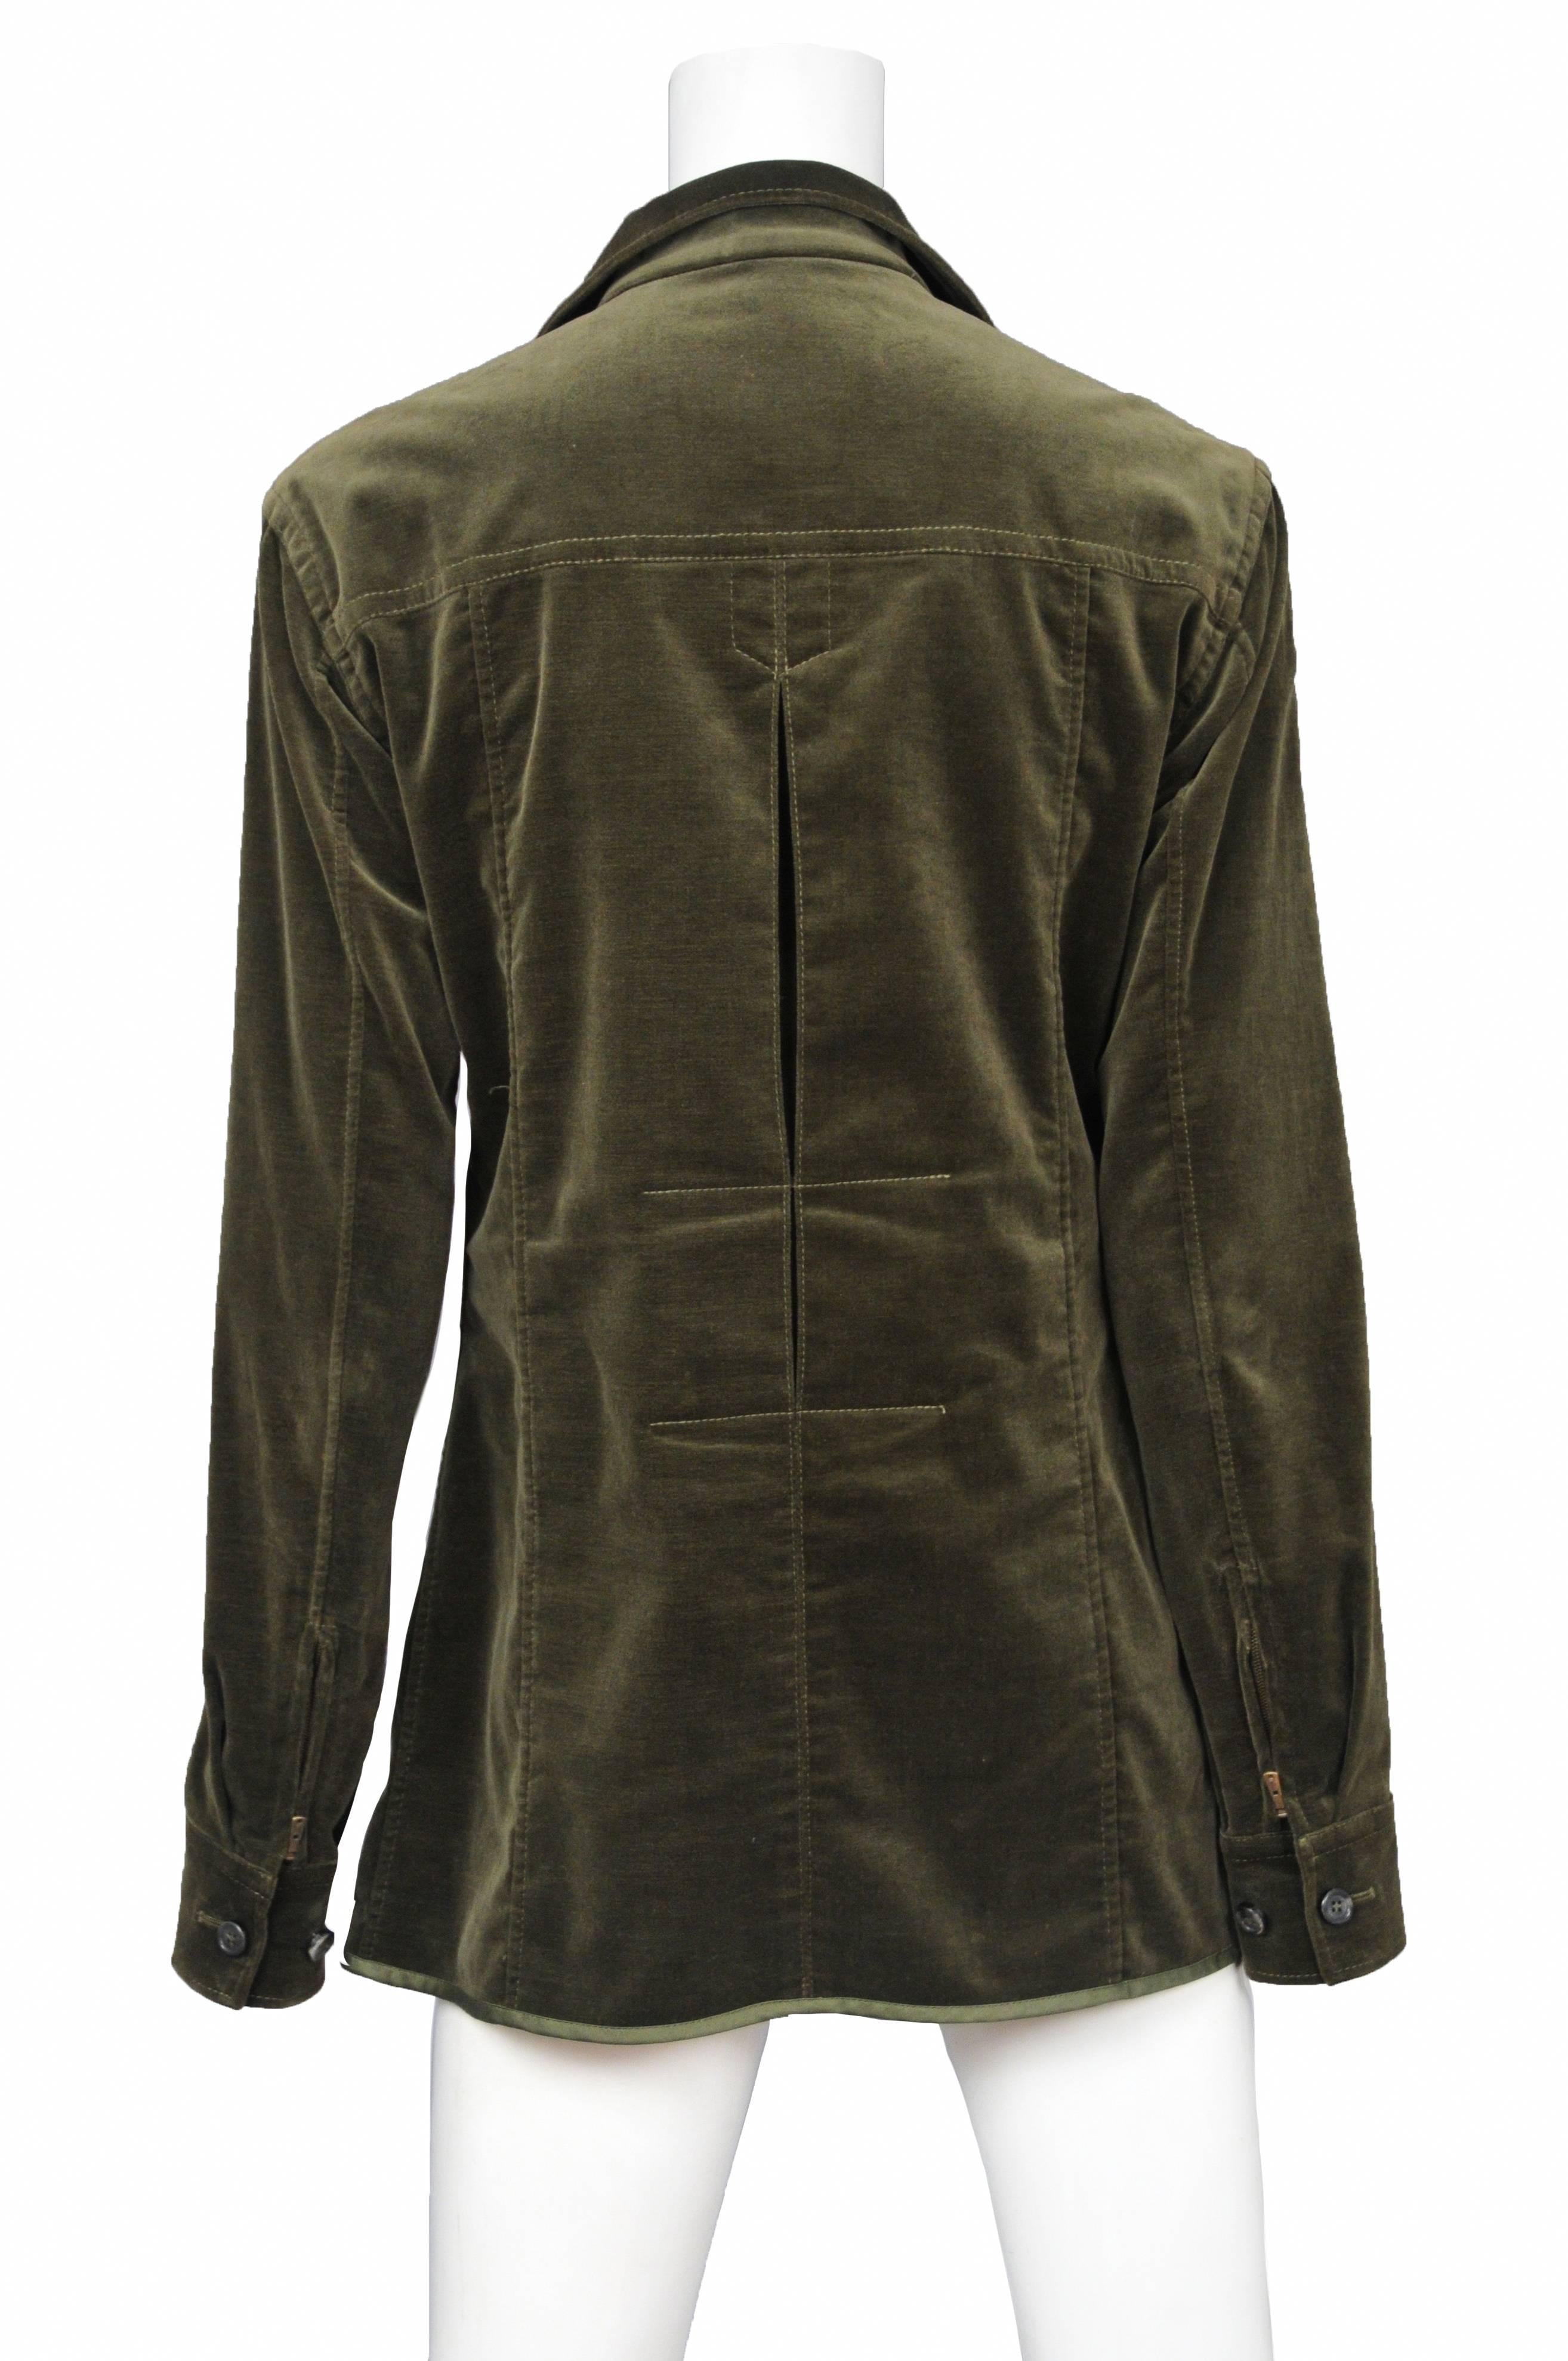 Vintage Tom Ford for Yves Saint Laurent olive green velvet safari jacket featuring a lace up and zipper front entrance and pockets at the chest and front hips.